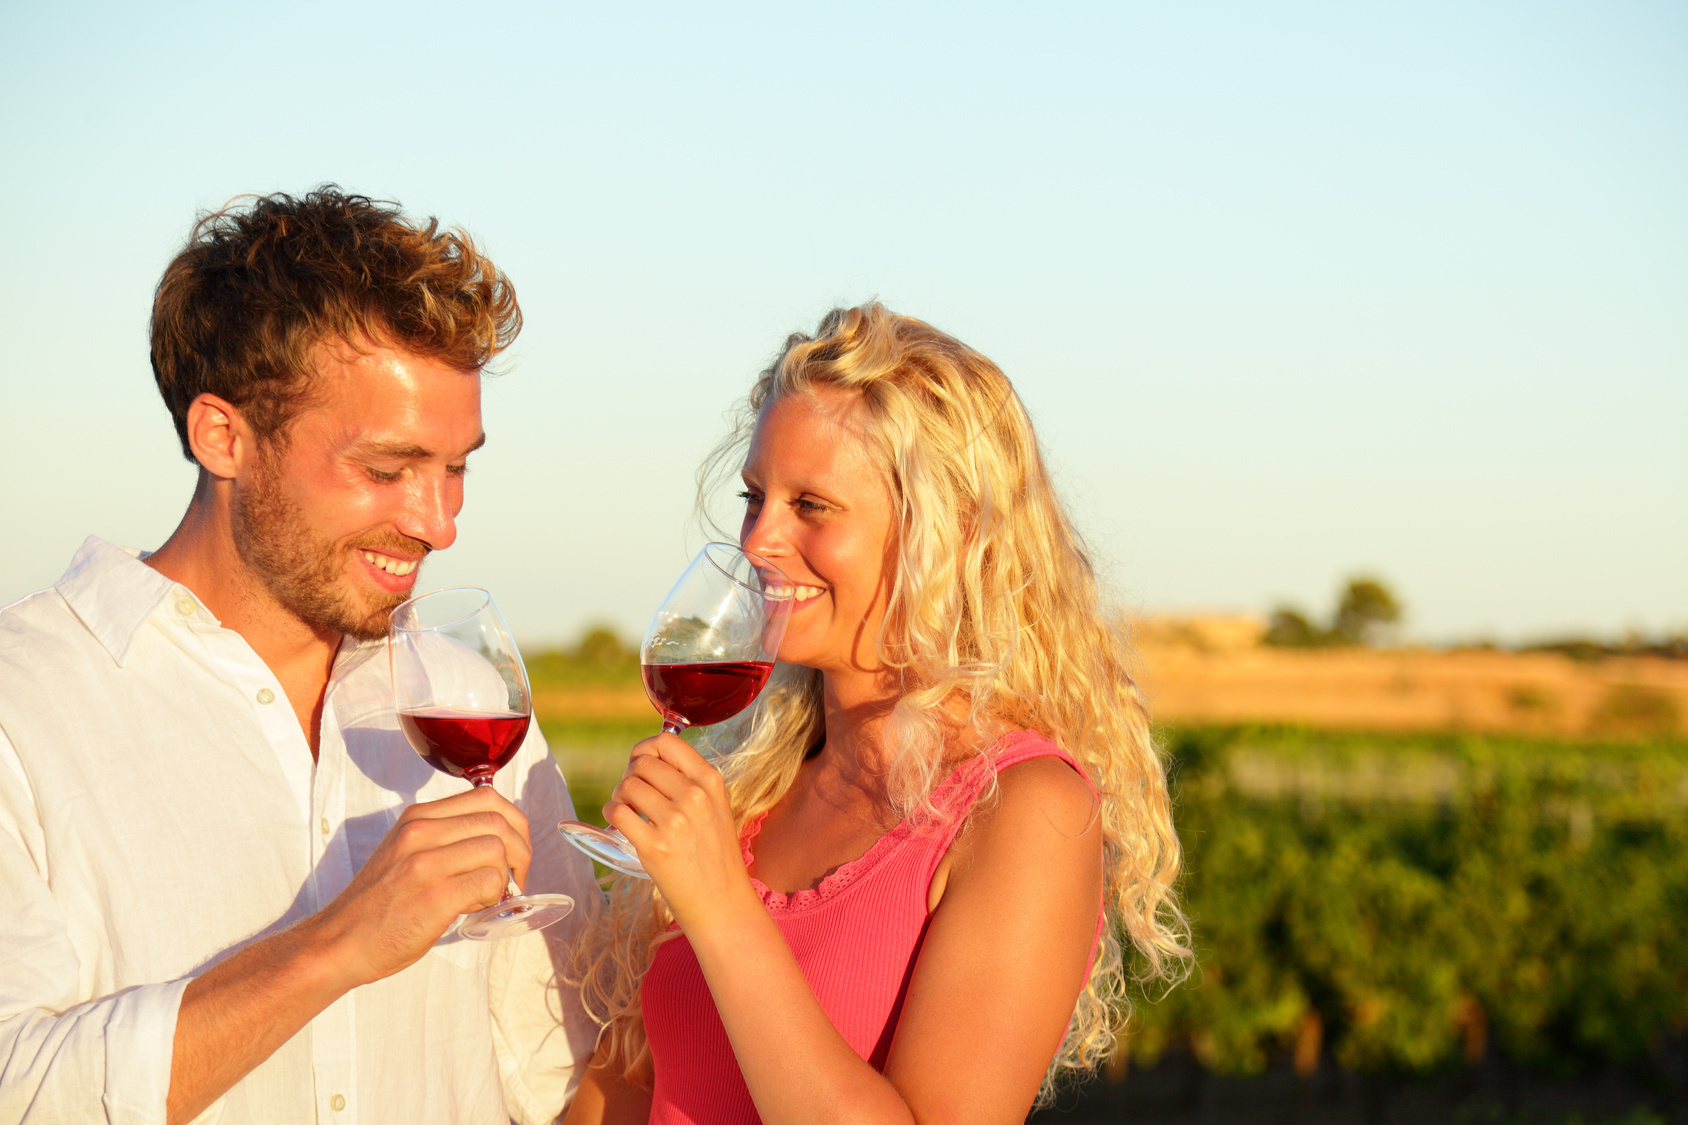 Drinking red wine couple at vineyard